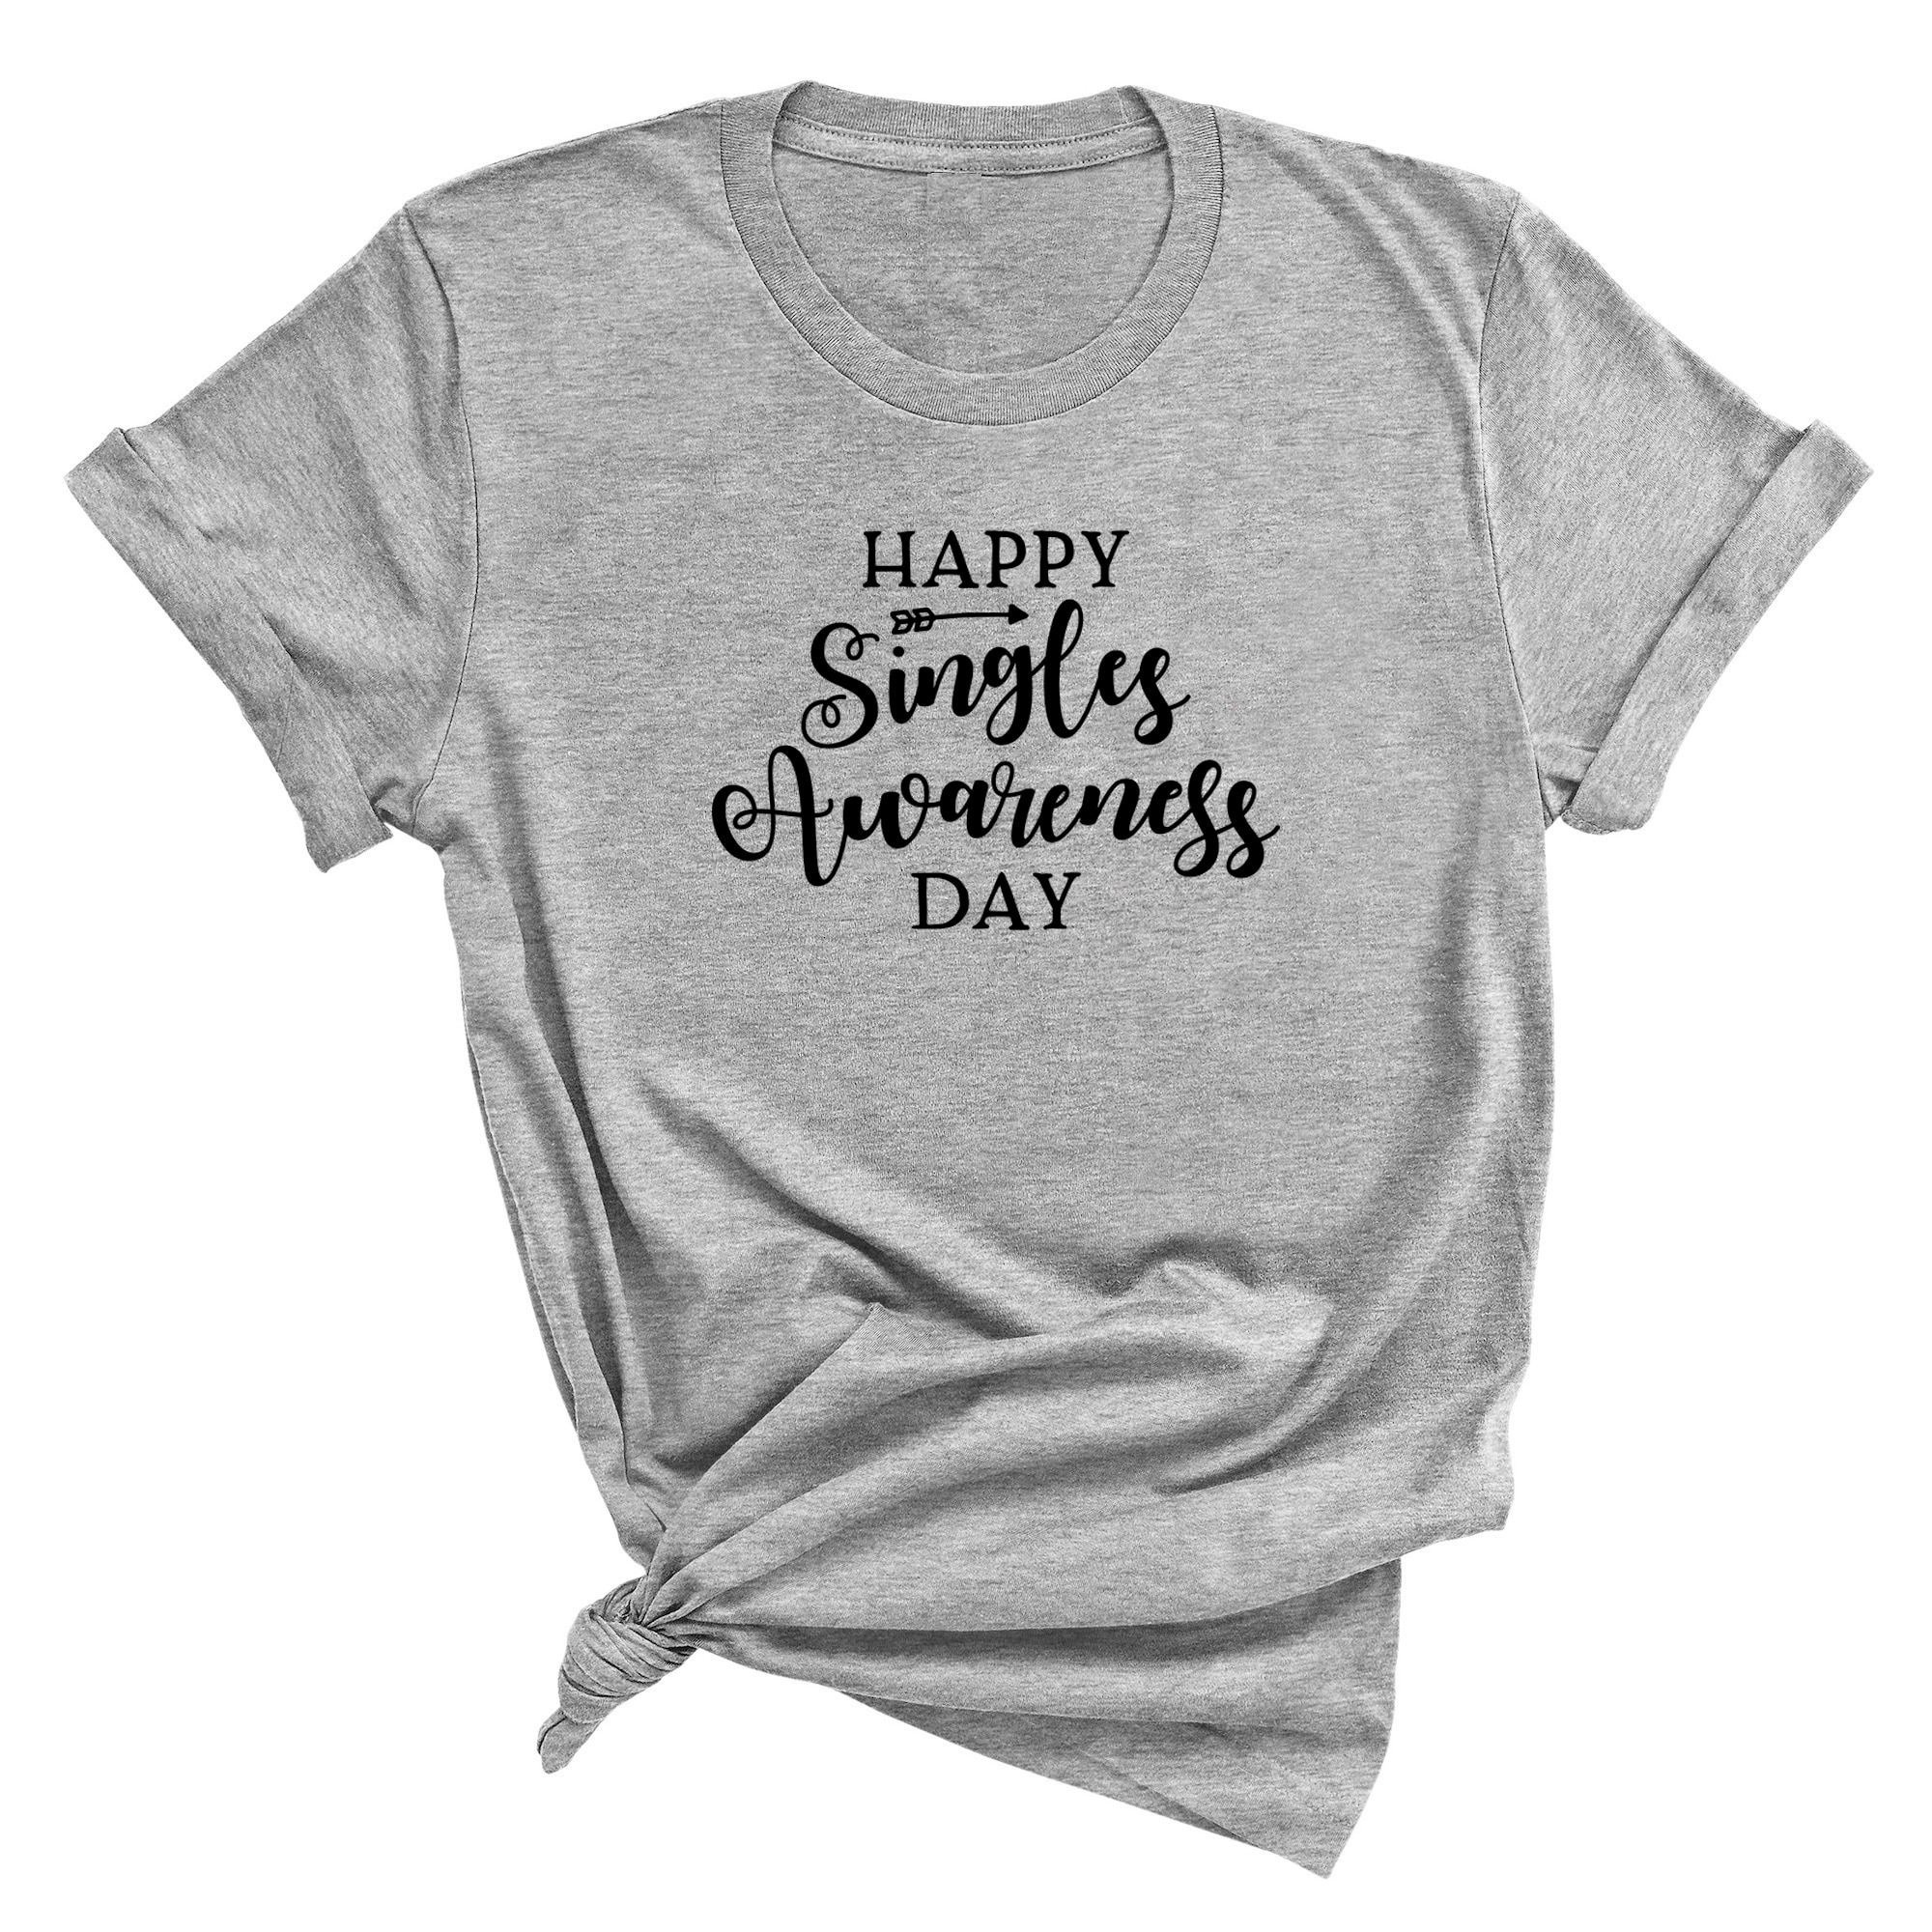 Happy Singles Awareness Day - Funny Anti-Valentine's Day T-Shirt